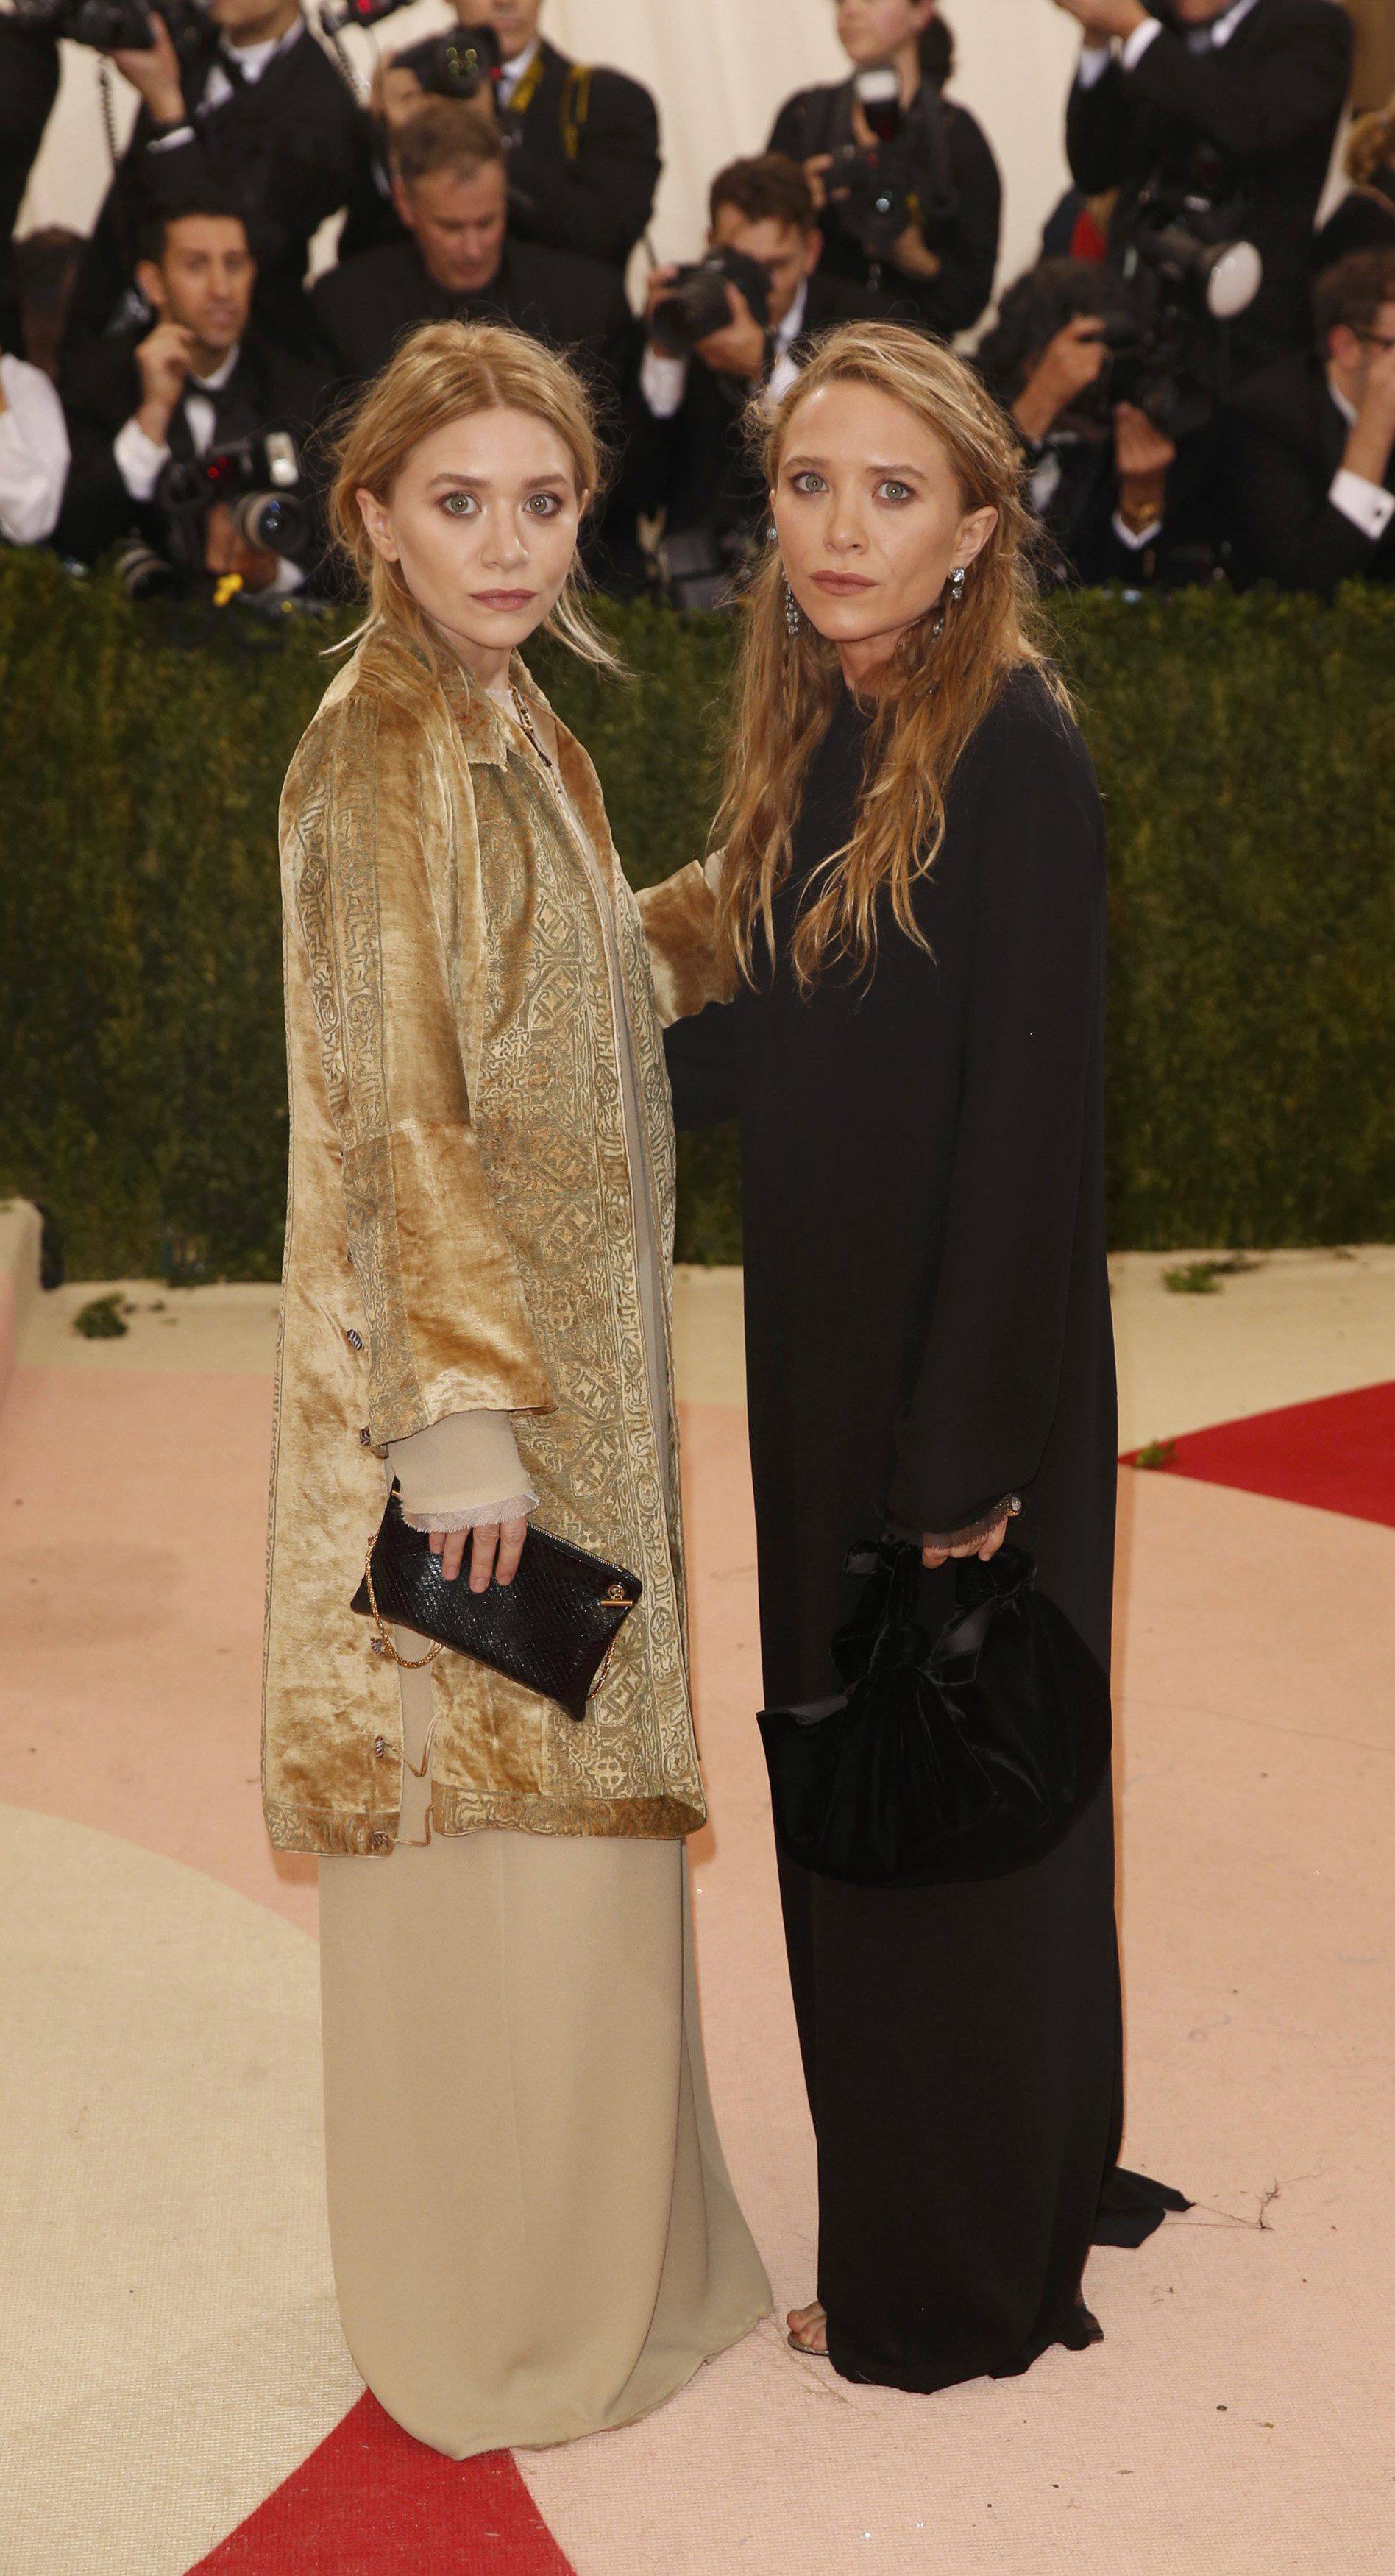 Mary-Kate and Ashley Olsen arrive at the Met Gala in New York